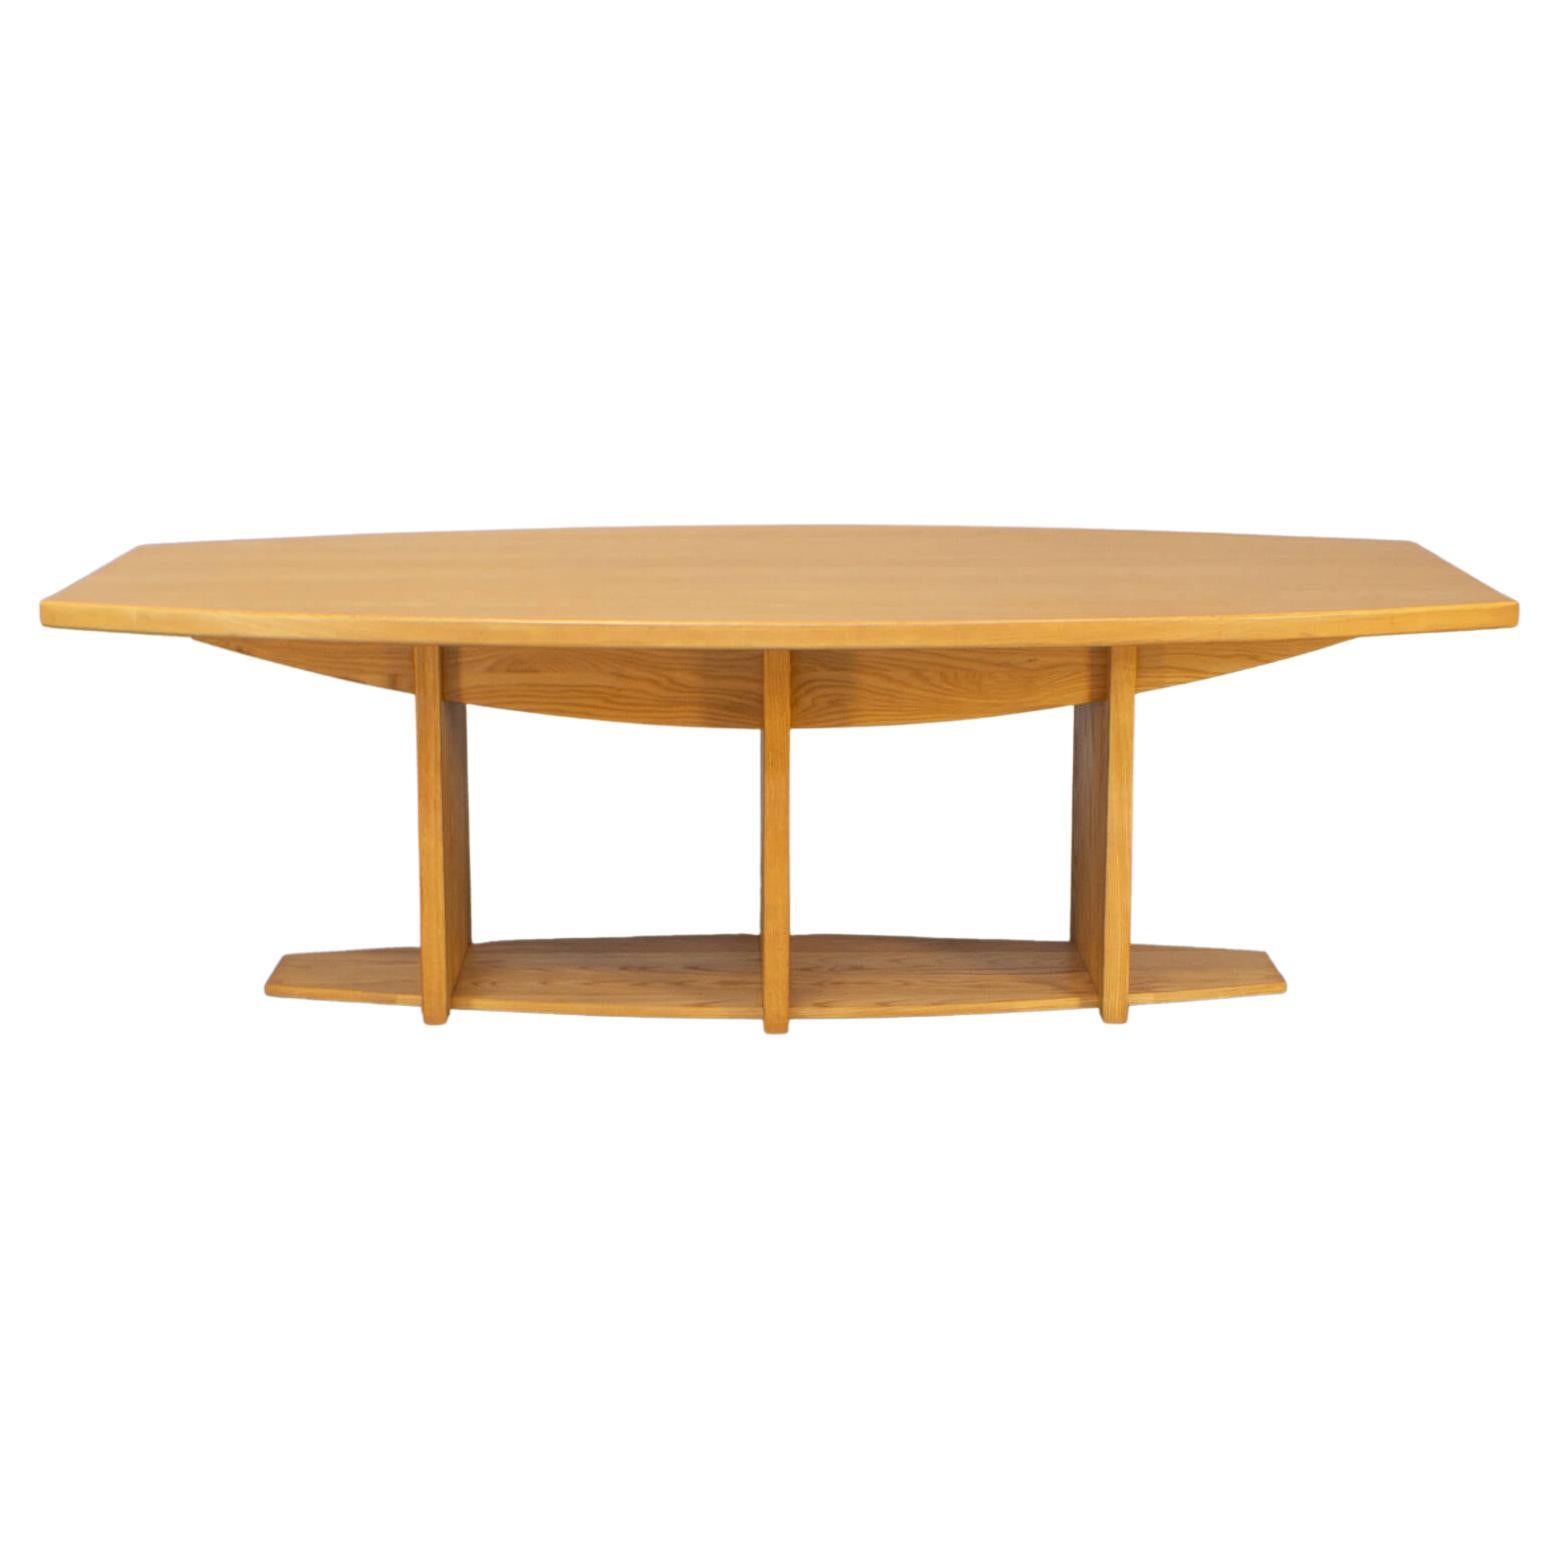 80s architectural oval dining table